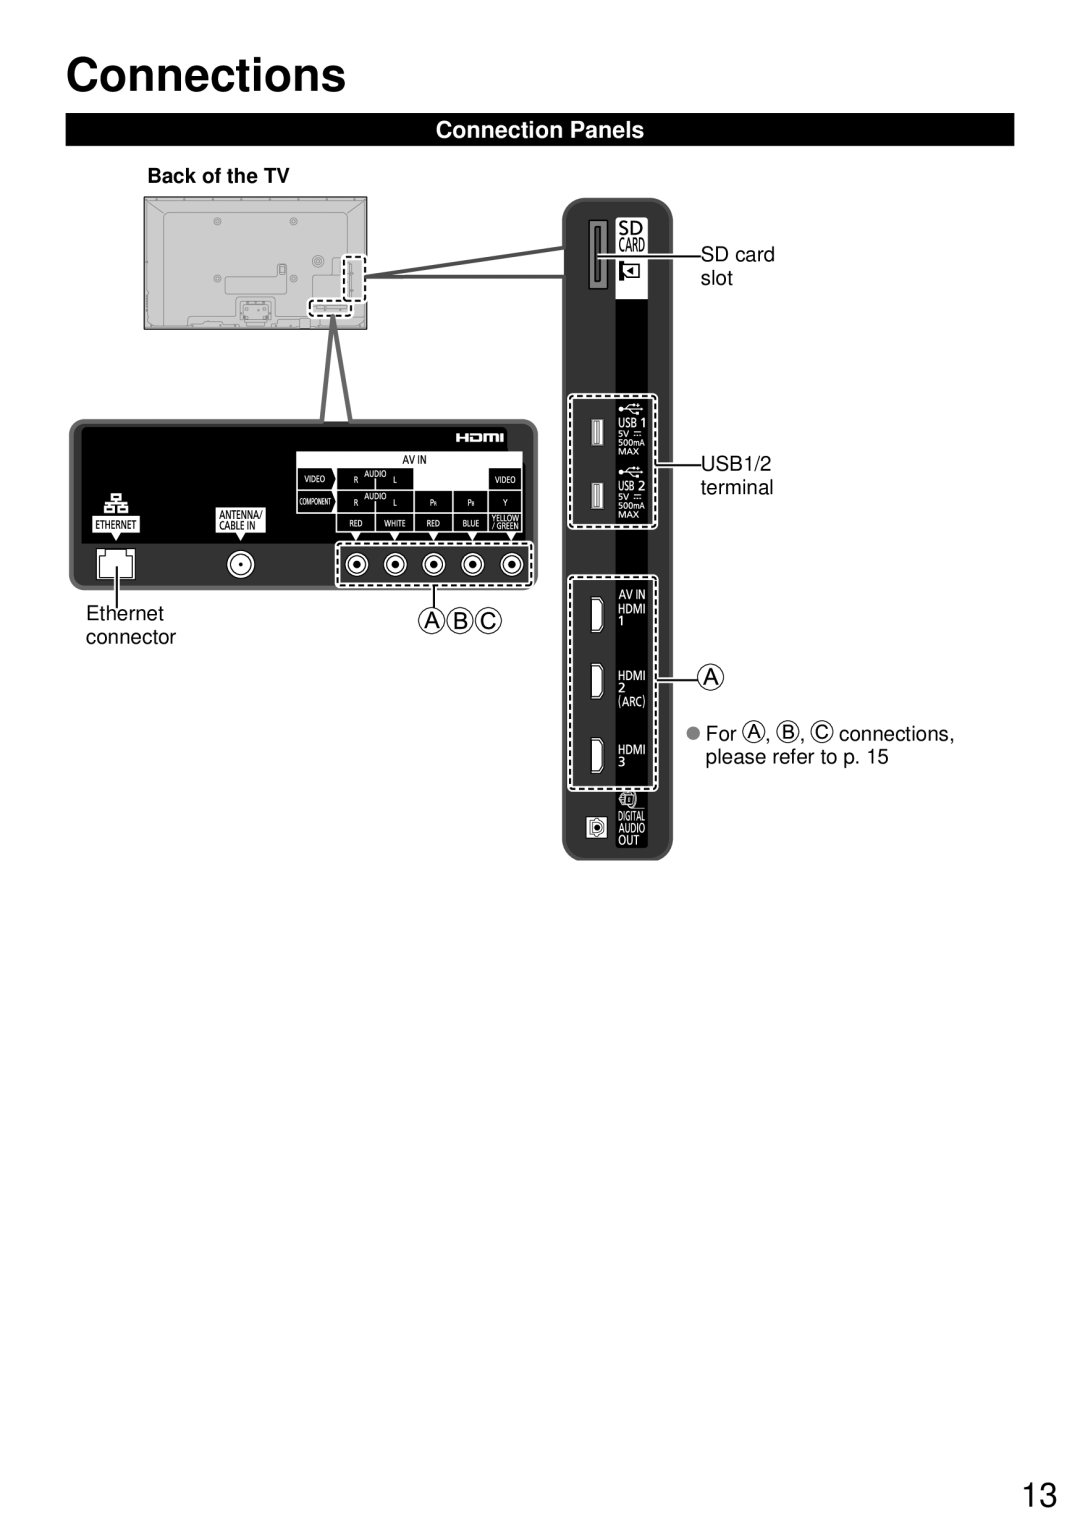 Panasonic TC-P60ST60, TC-P50ST60, TC-P55ST60, TC-P65ST60 owner manual Connections, Connection Panels, Back of the TV 